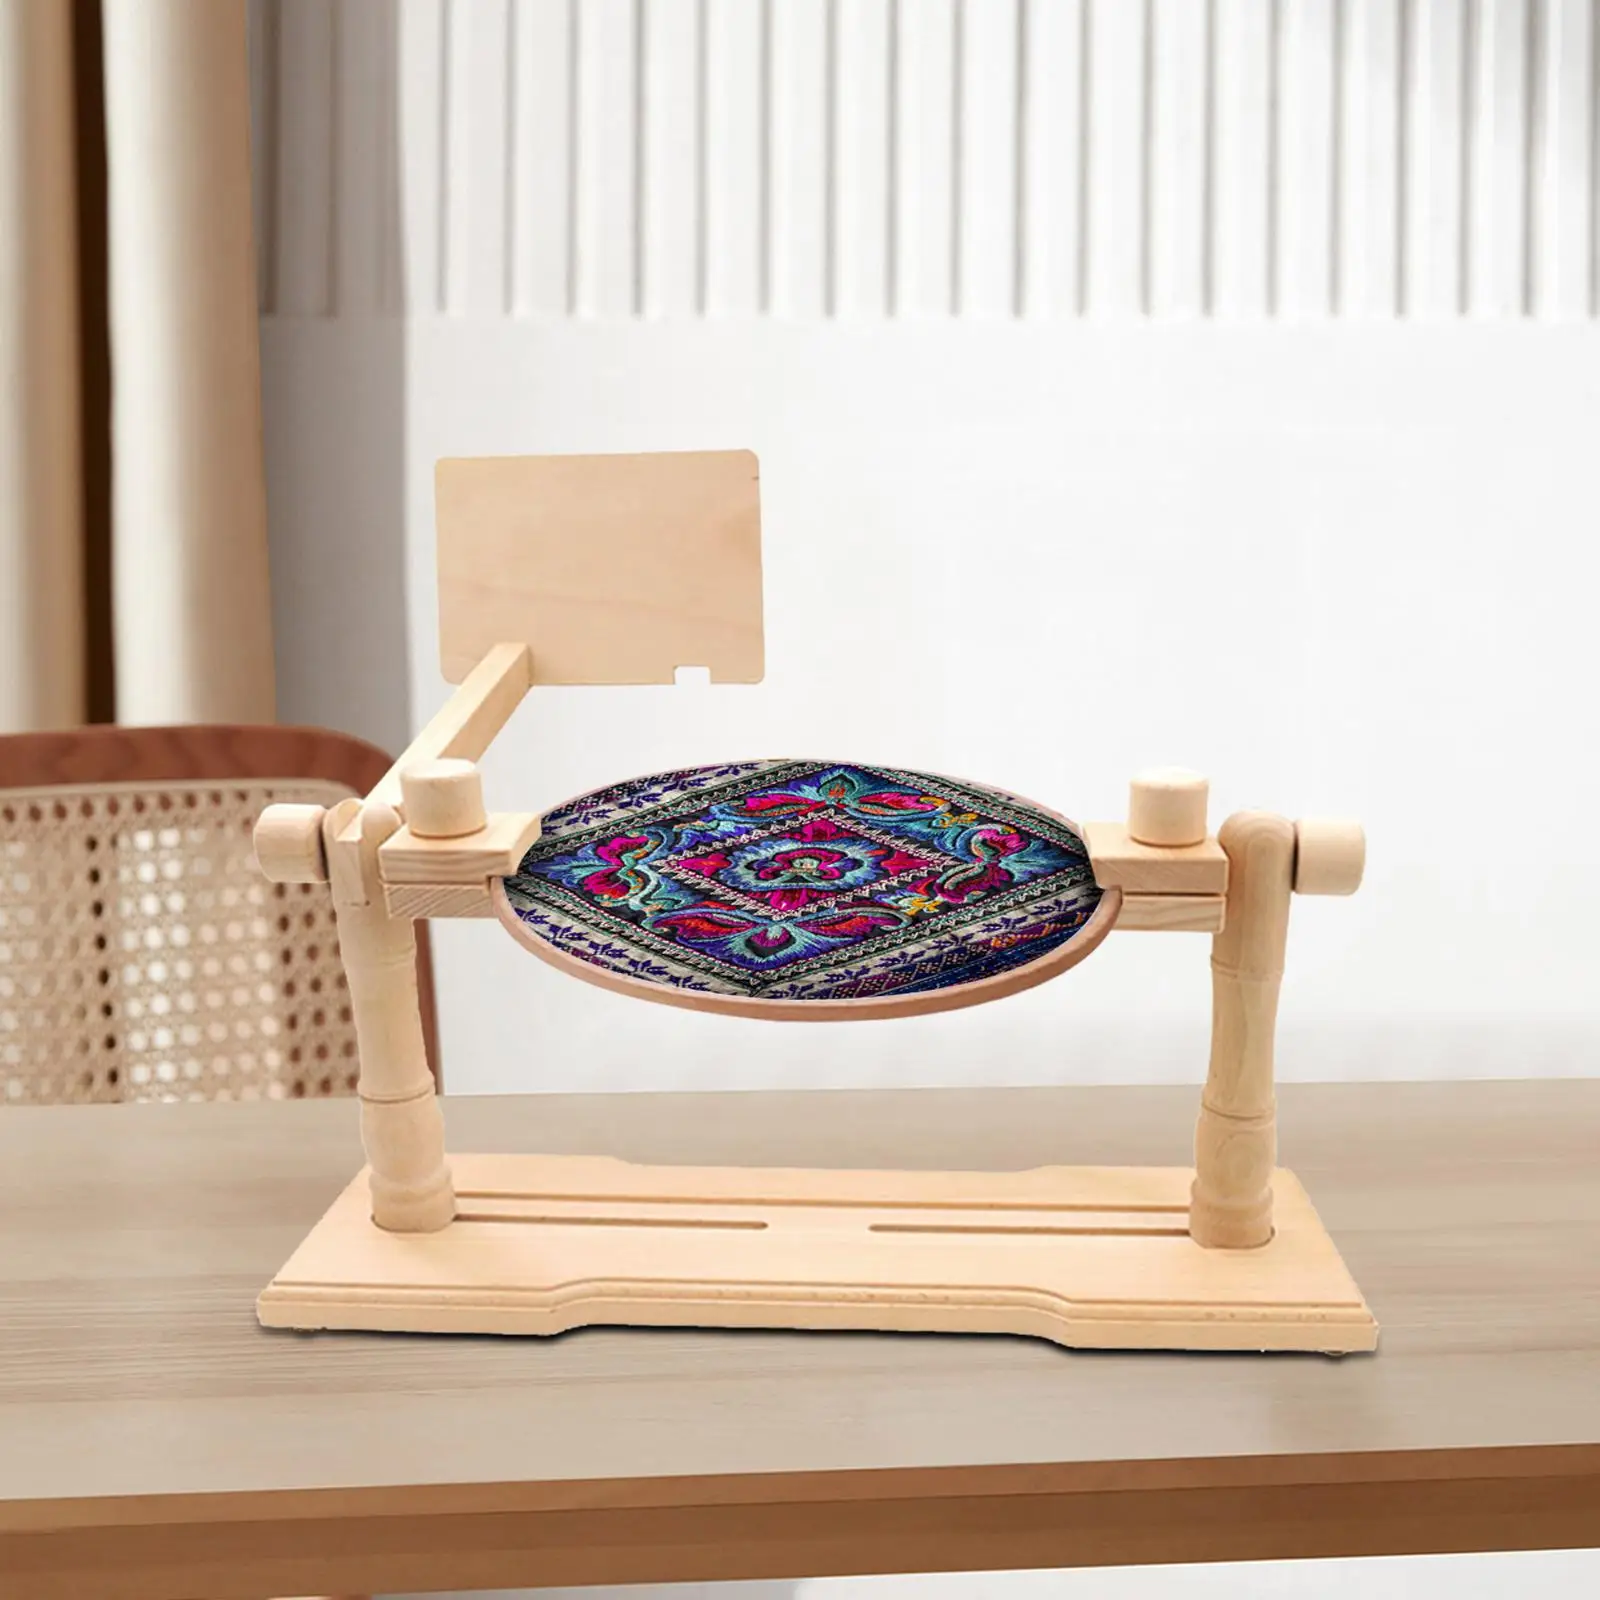 Wooden Embroidery Hoop Stand Rotated Adjustable Cross Stitch Rack Tabletop Embroidery Project Needlework Kids Girl